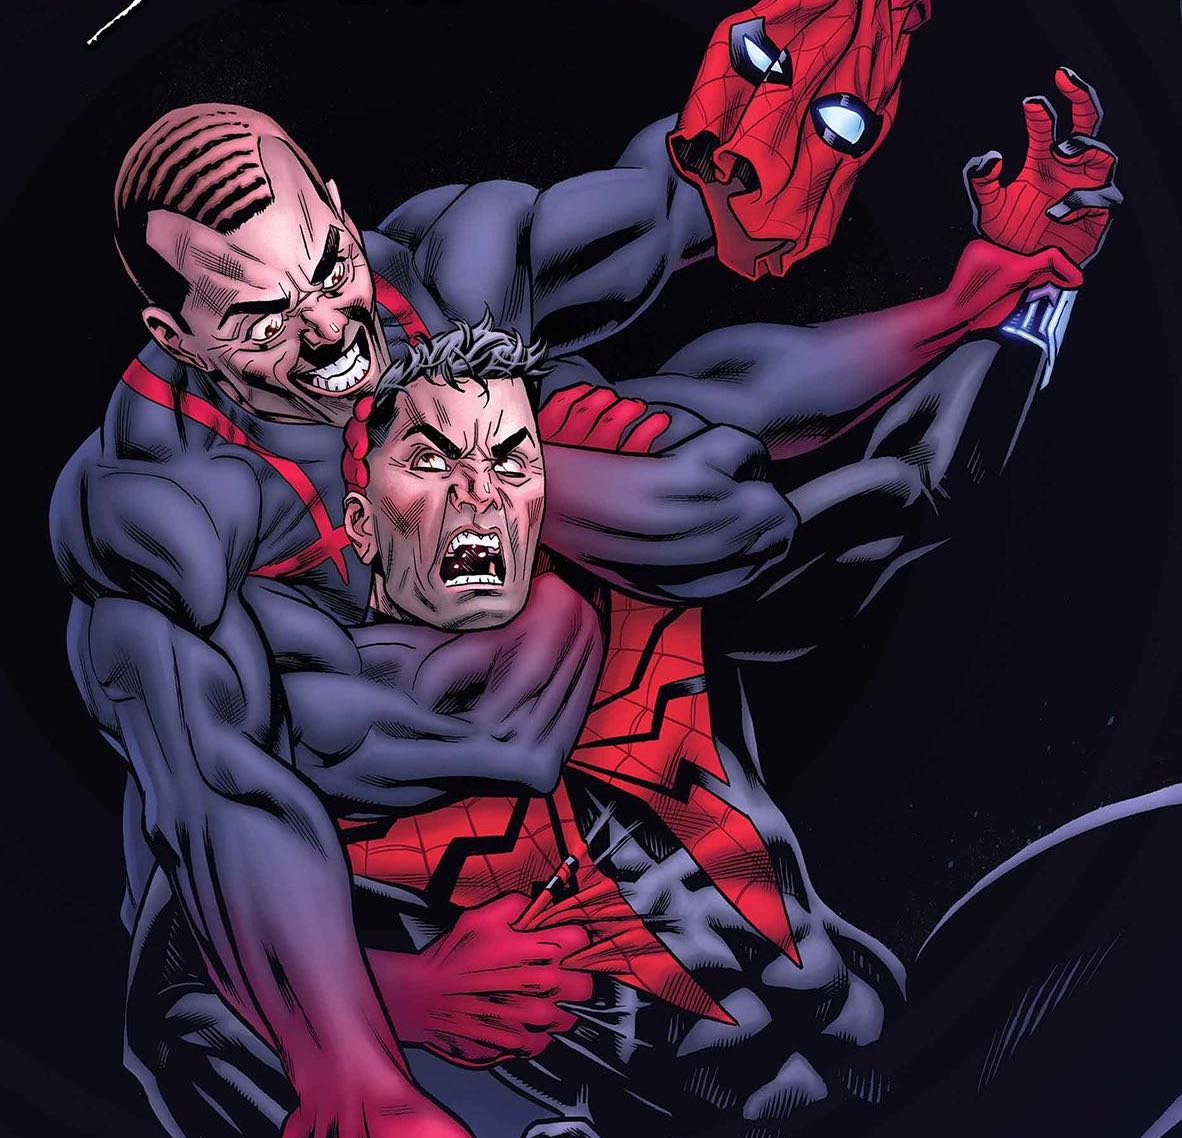 Is this Superior Spider-Man's Brand New Day moment in 'Superior Spider-Man' #11?